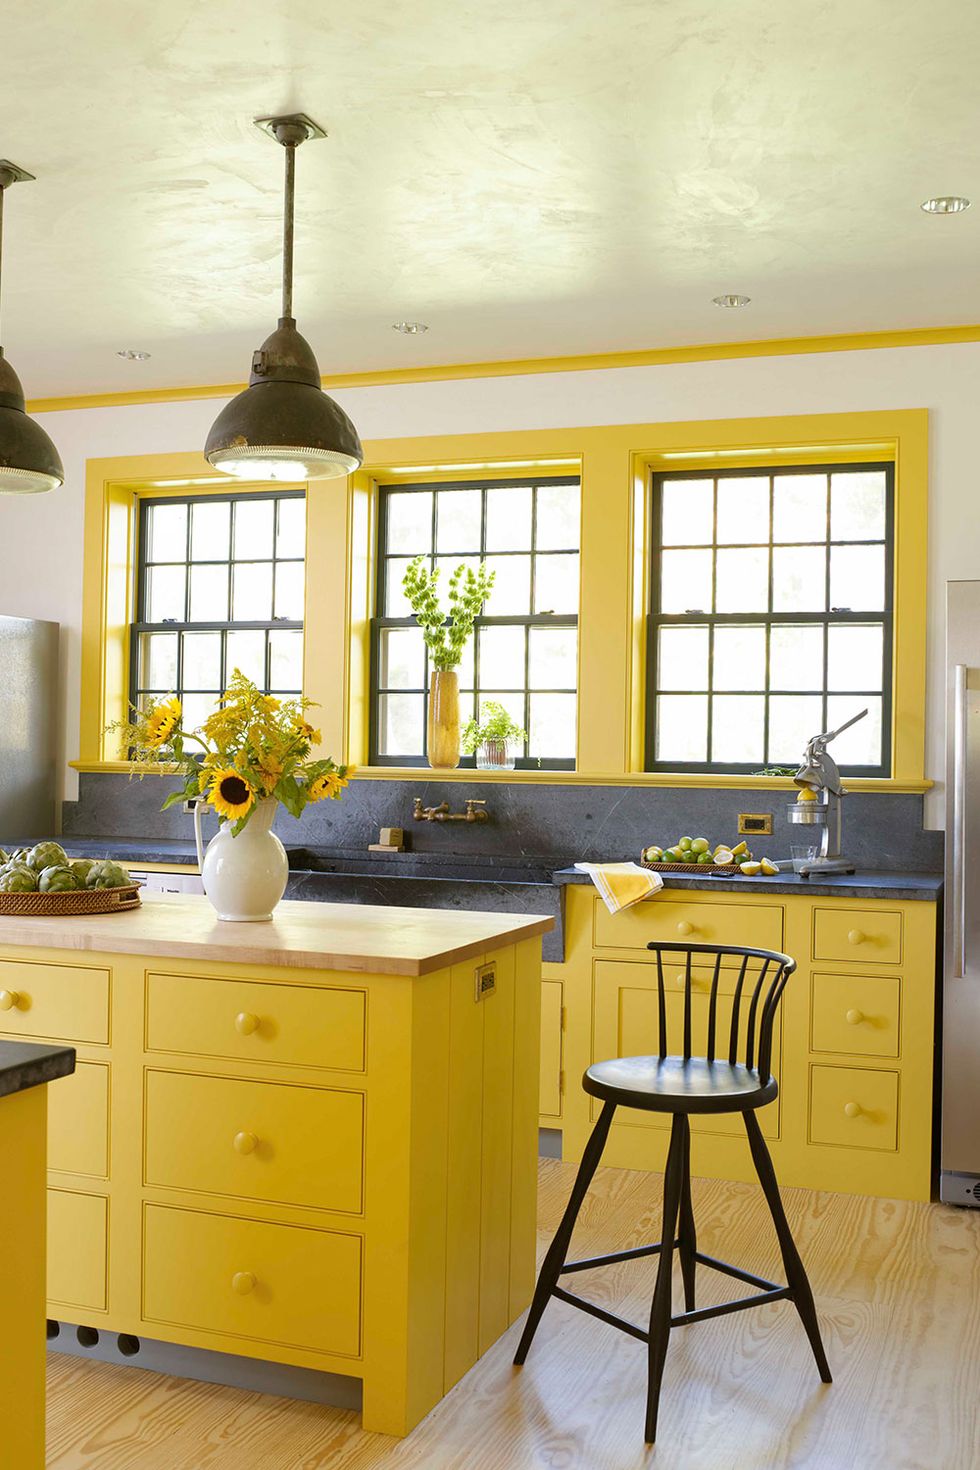 21 Yellow Kitchen Ideas Decorating Tips For Colored Kitchens